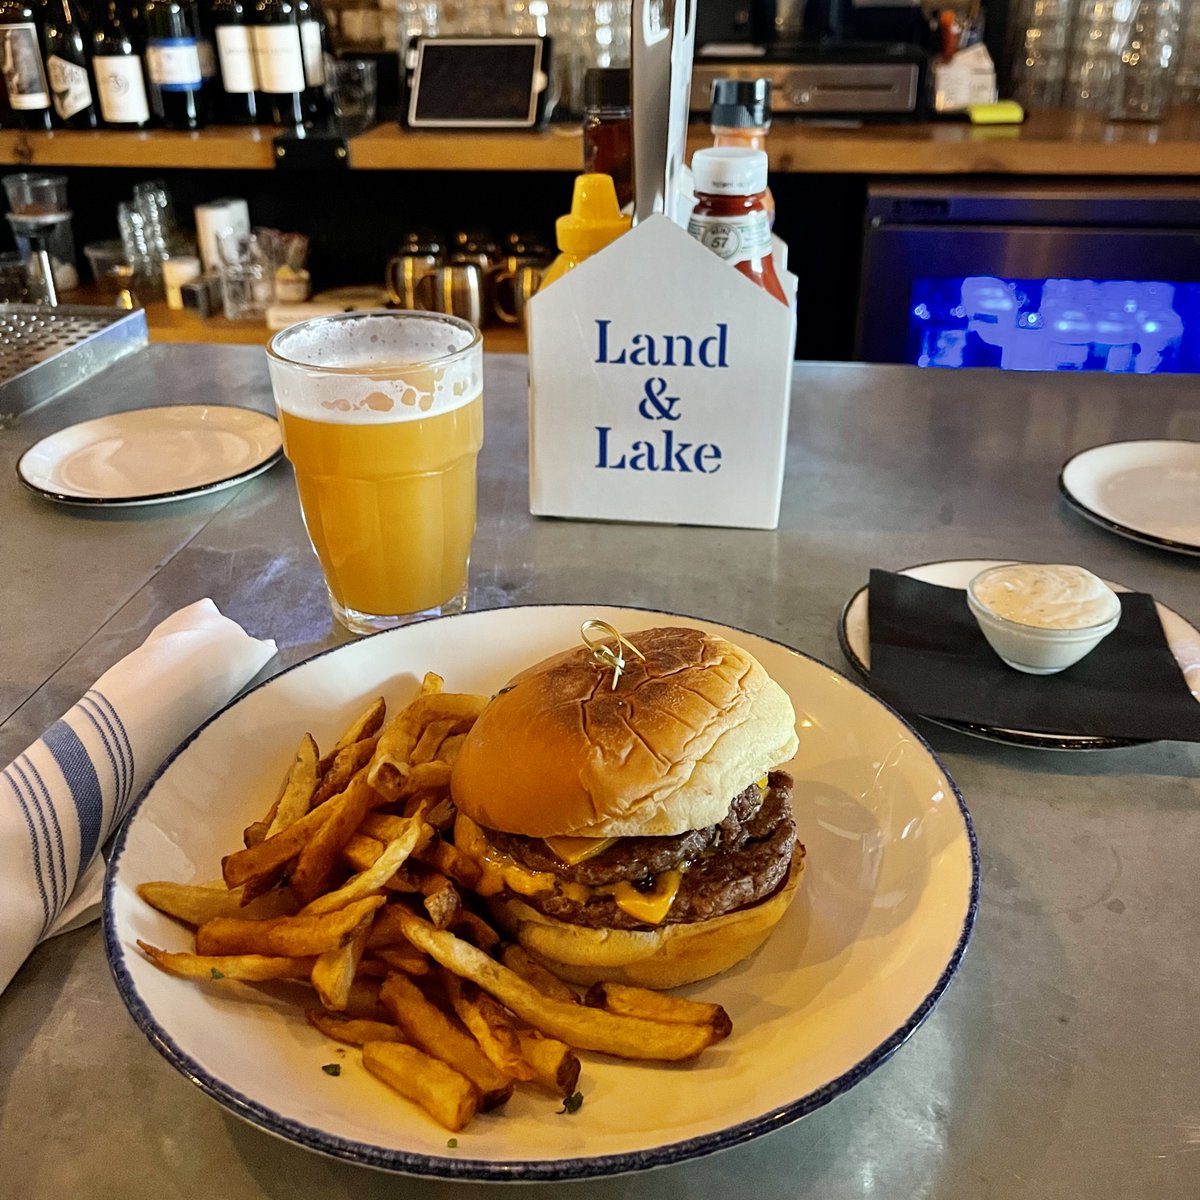 Tomorrow is Tuesday and you know what that means... BURGERS & BREWS! 🍔🍺 Every Tuesday enjoy a burger and fries with a pint of featured beer for $15.
•
#EEEEEats #infatuationchi #eaterchicago #chicagoeats #chicagofoodie #fabfoodchicago #chicagofoodauthority #312food